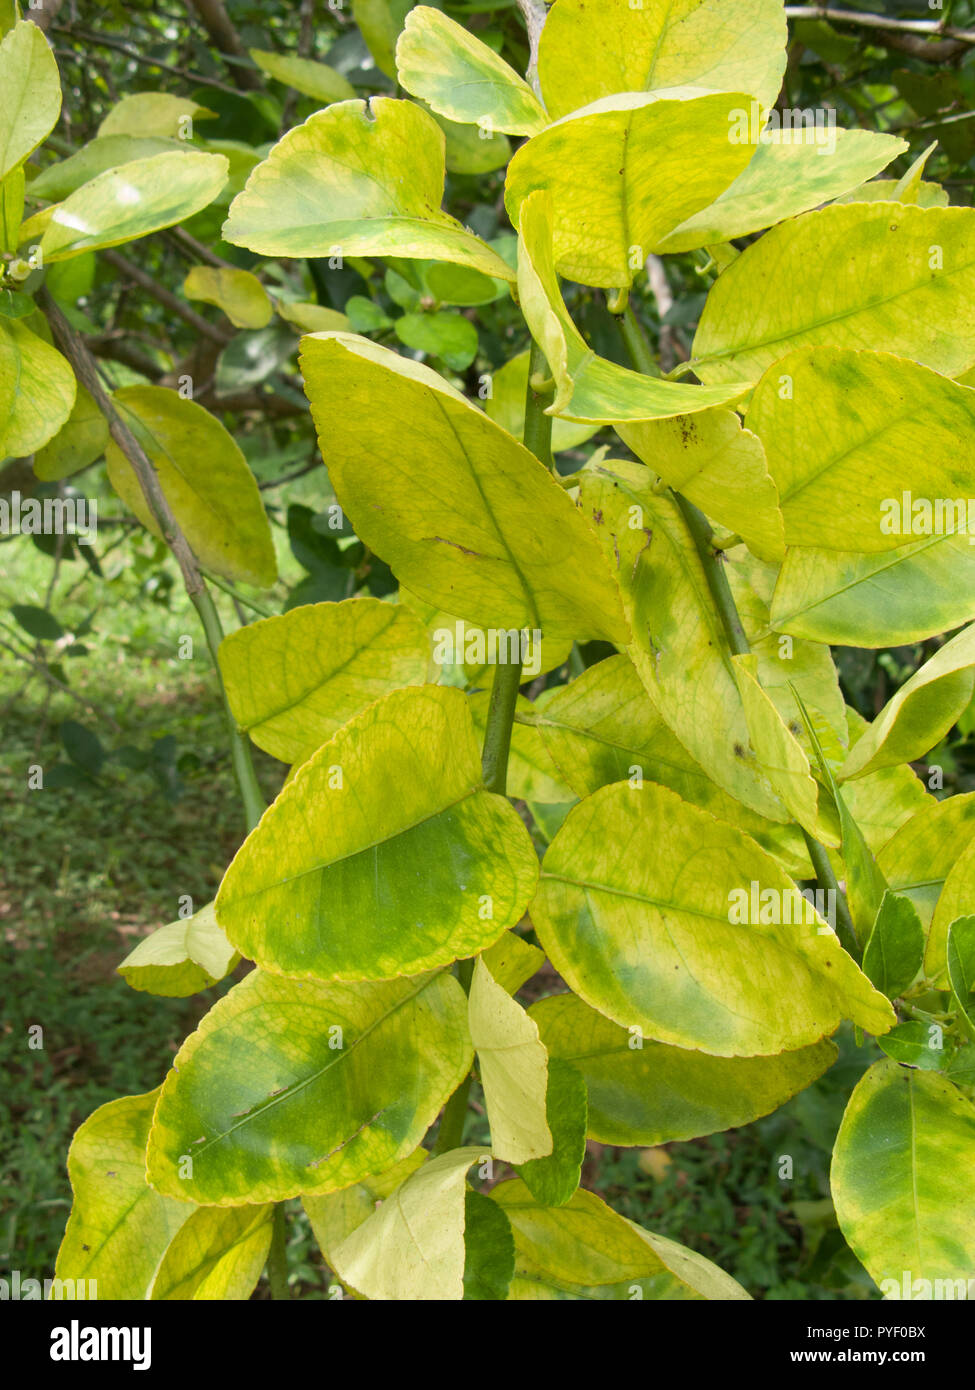 Orange citrus trees orchard heavily  infected with huanglongbing yellow dragon citrus greening plague deadly disease Stock Photo